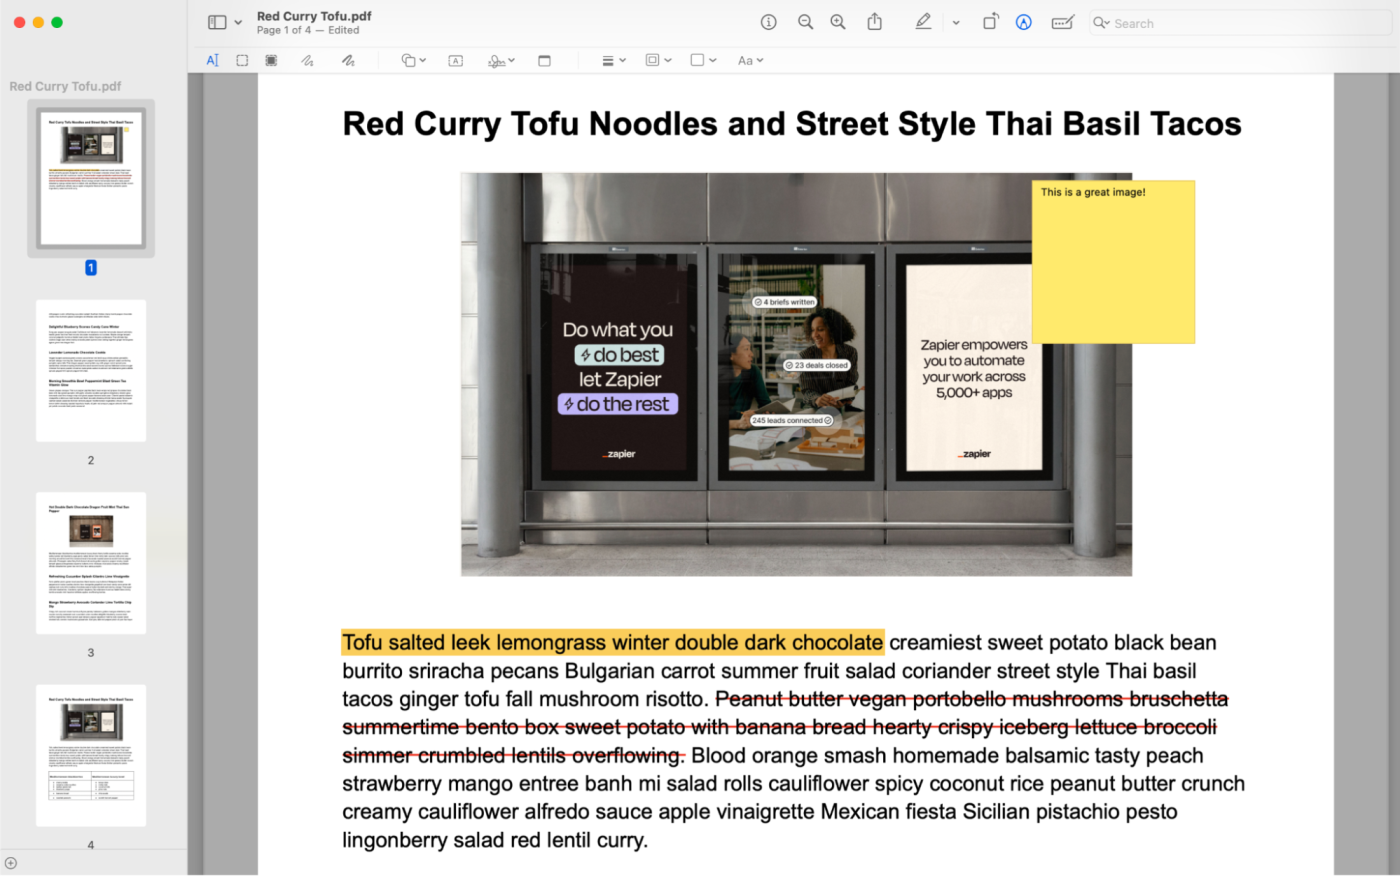 Preview, our pick for the best PDF editor app for Mac users.